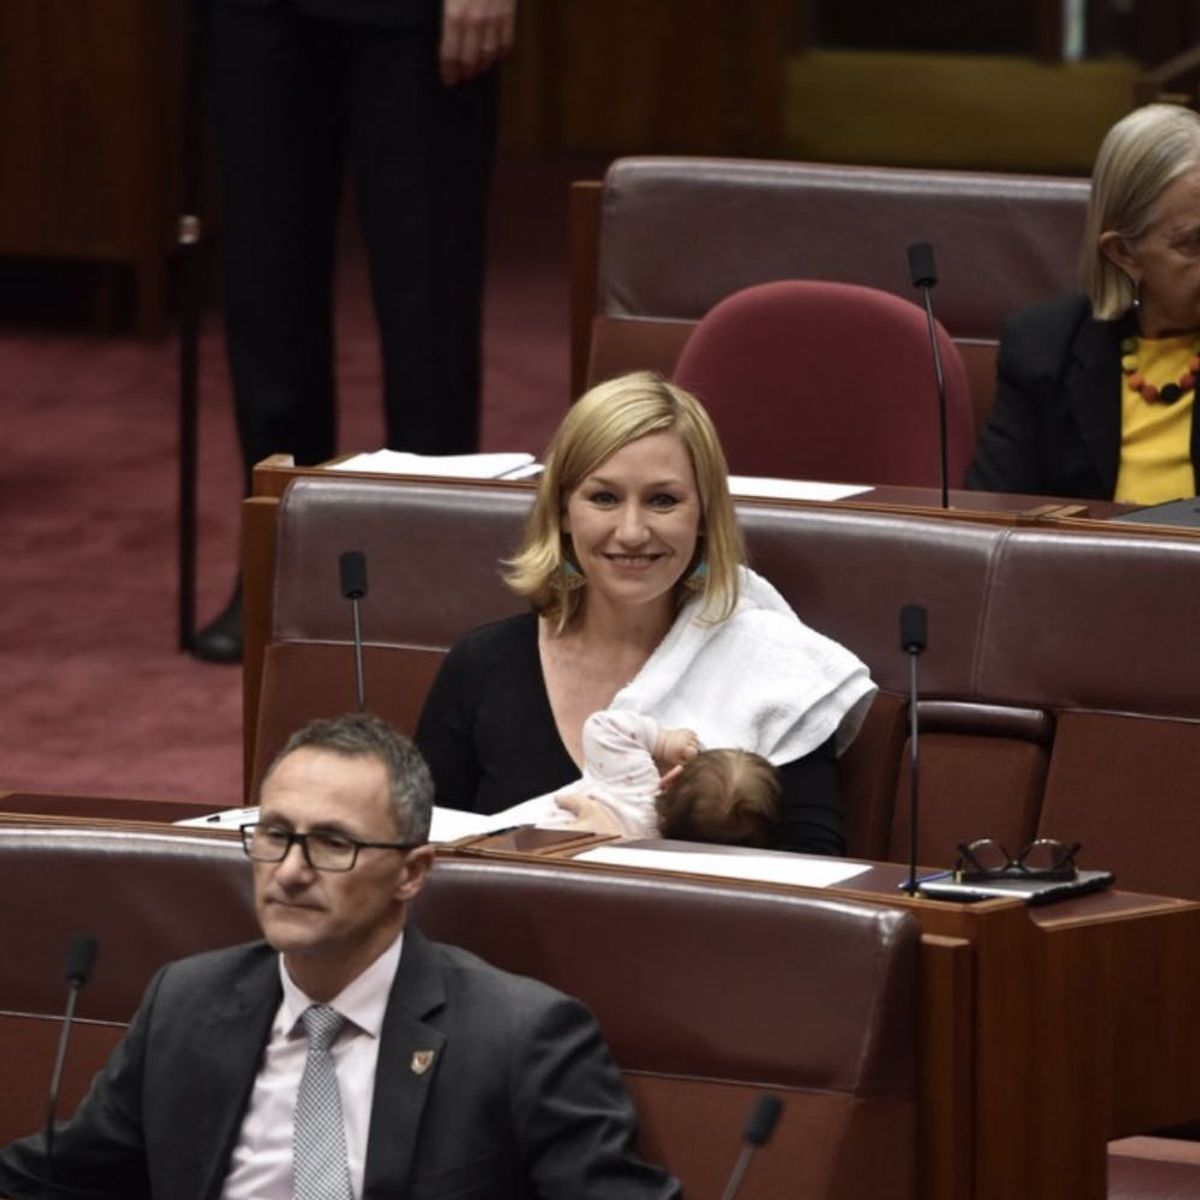 Ladies First: Australian Senator Larissa Waters Just Made History by Breastfeeding Her New Daughter in Parliament